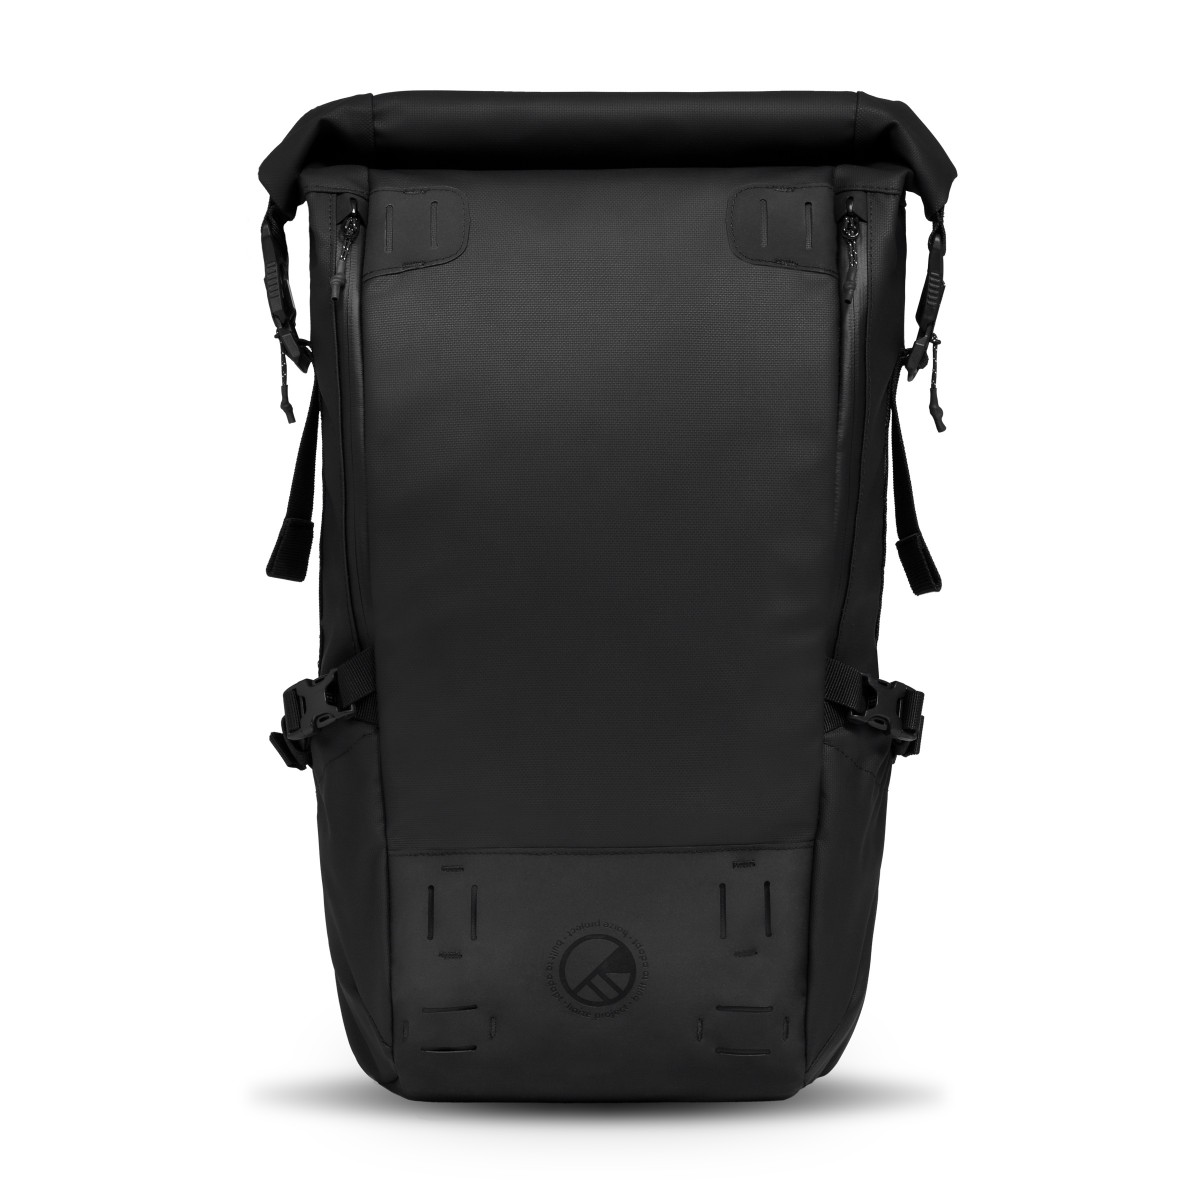 Haize Project Backpack N°0.0 - Mukama